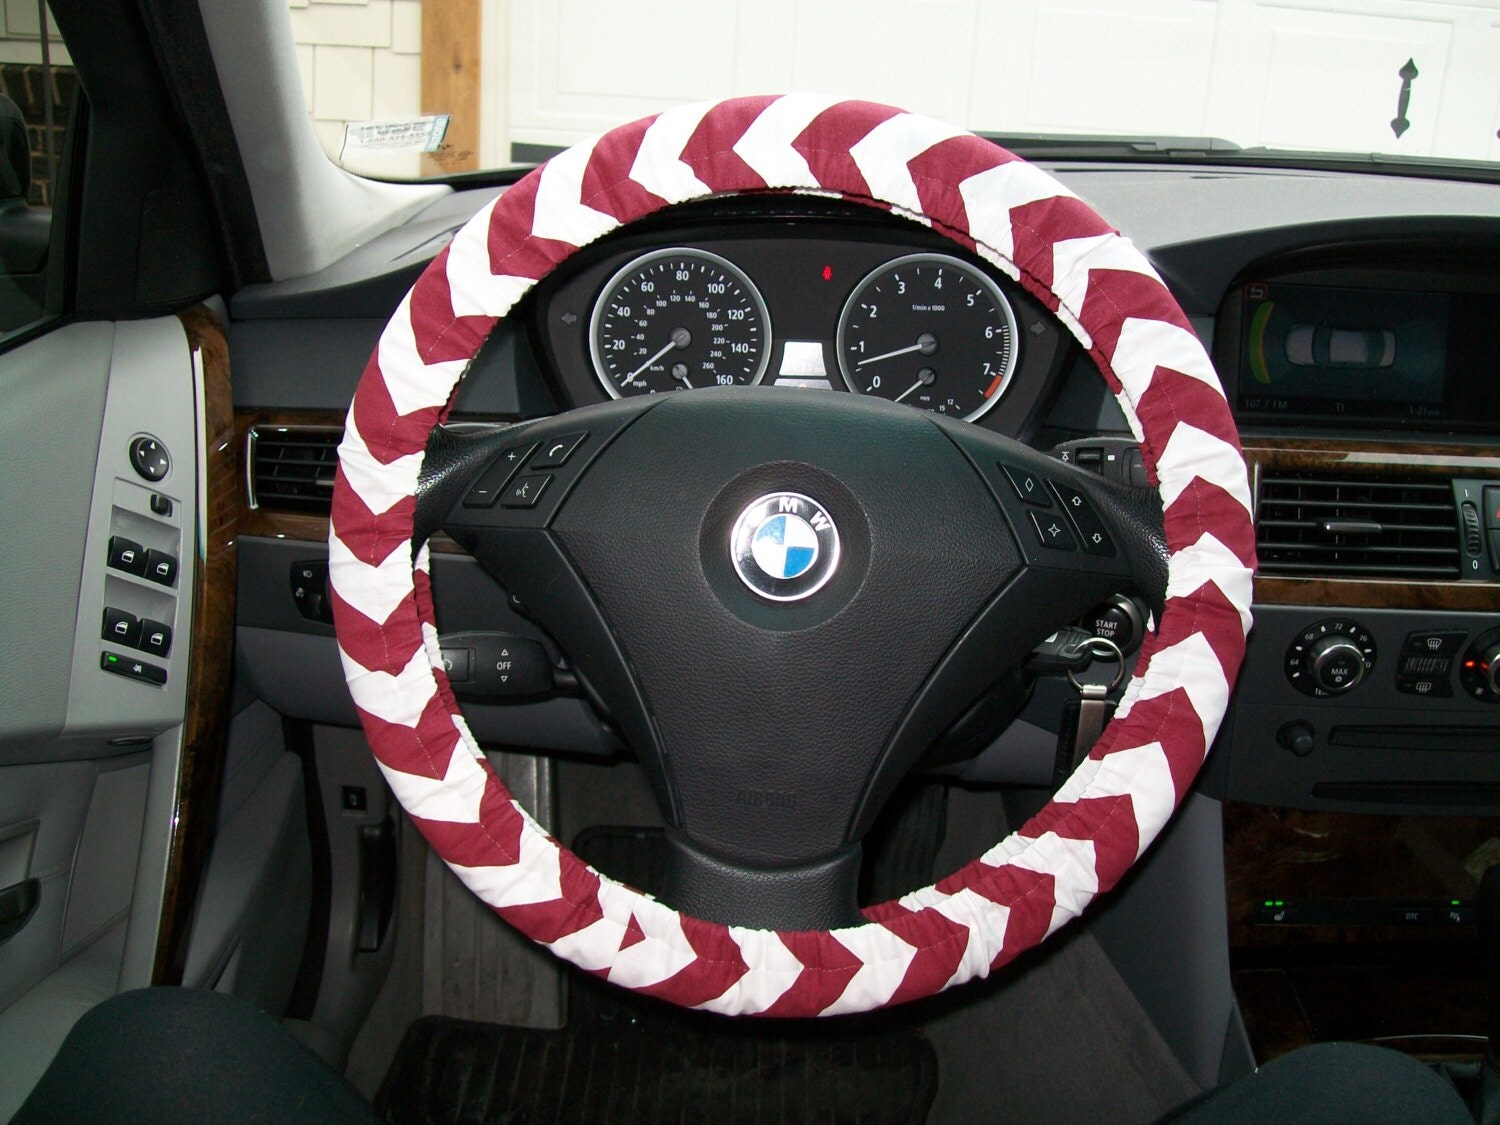 Maroon and White Chevron Steering Wheel Cover by mammajane on Etsy